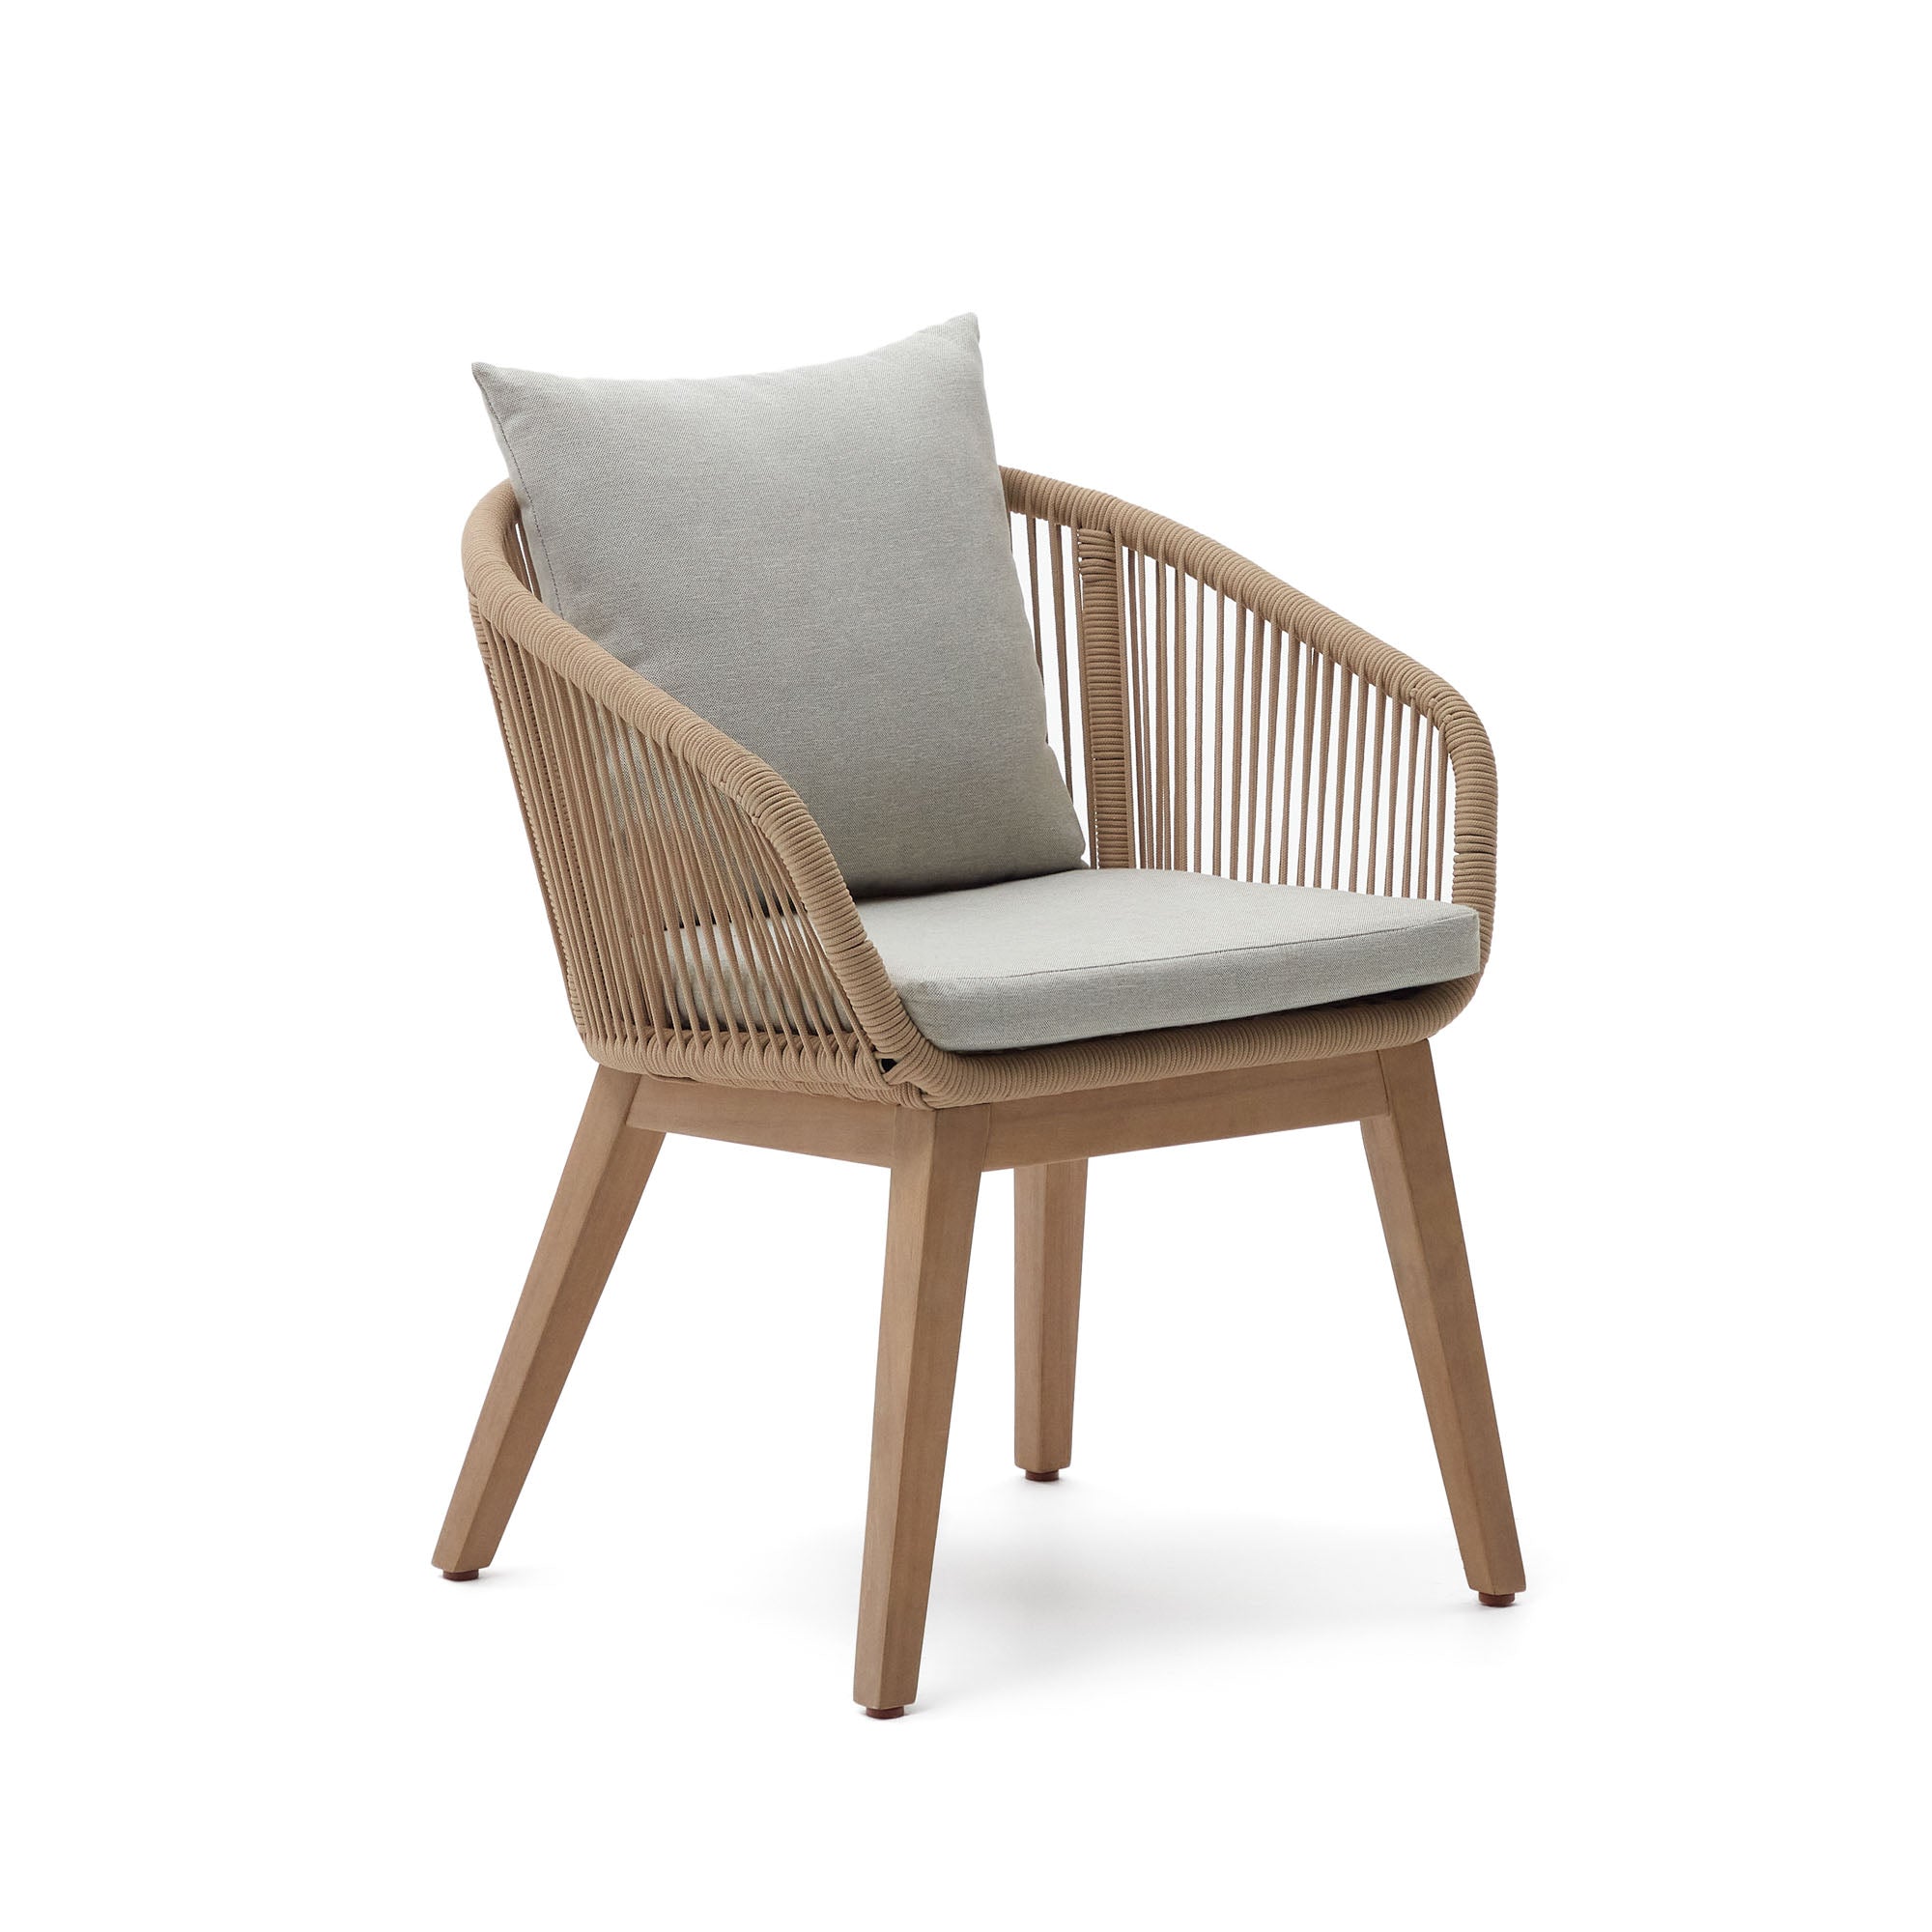 Portalo chair in beige cord with solid acacia wood legs